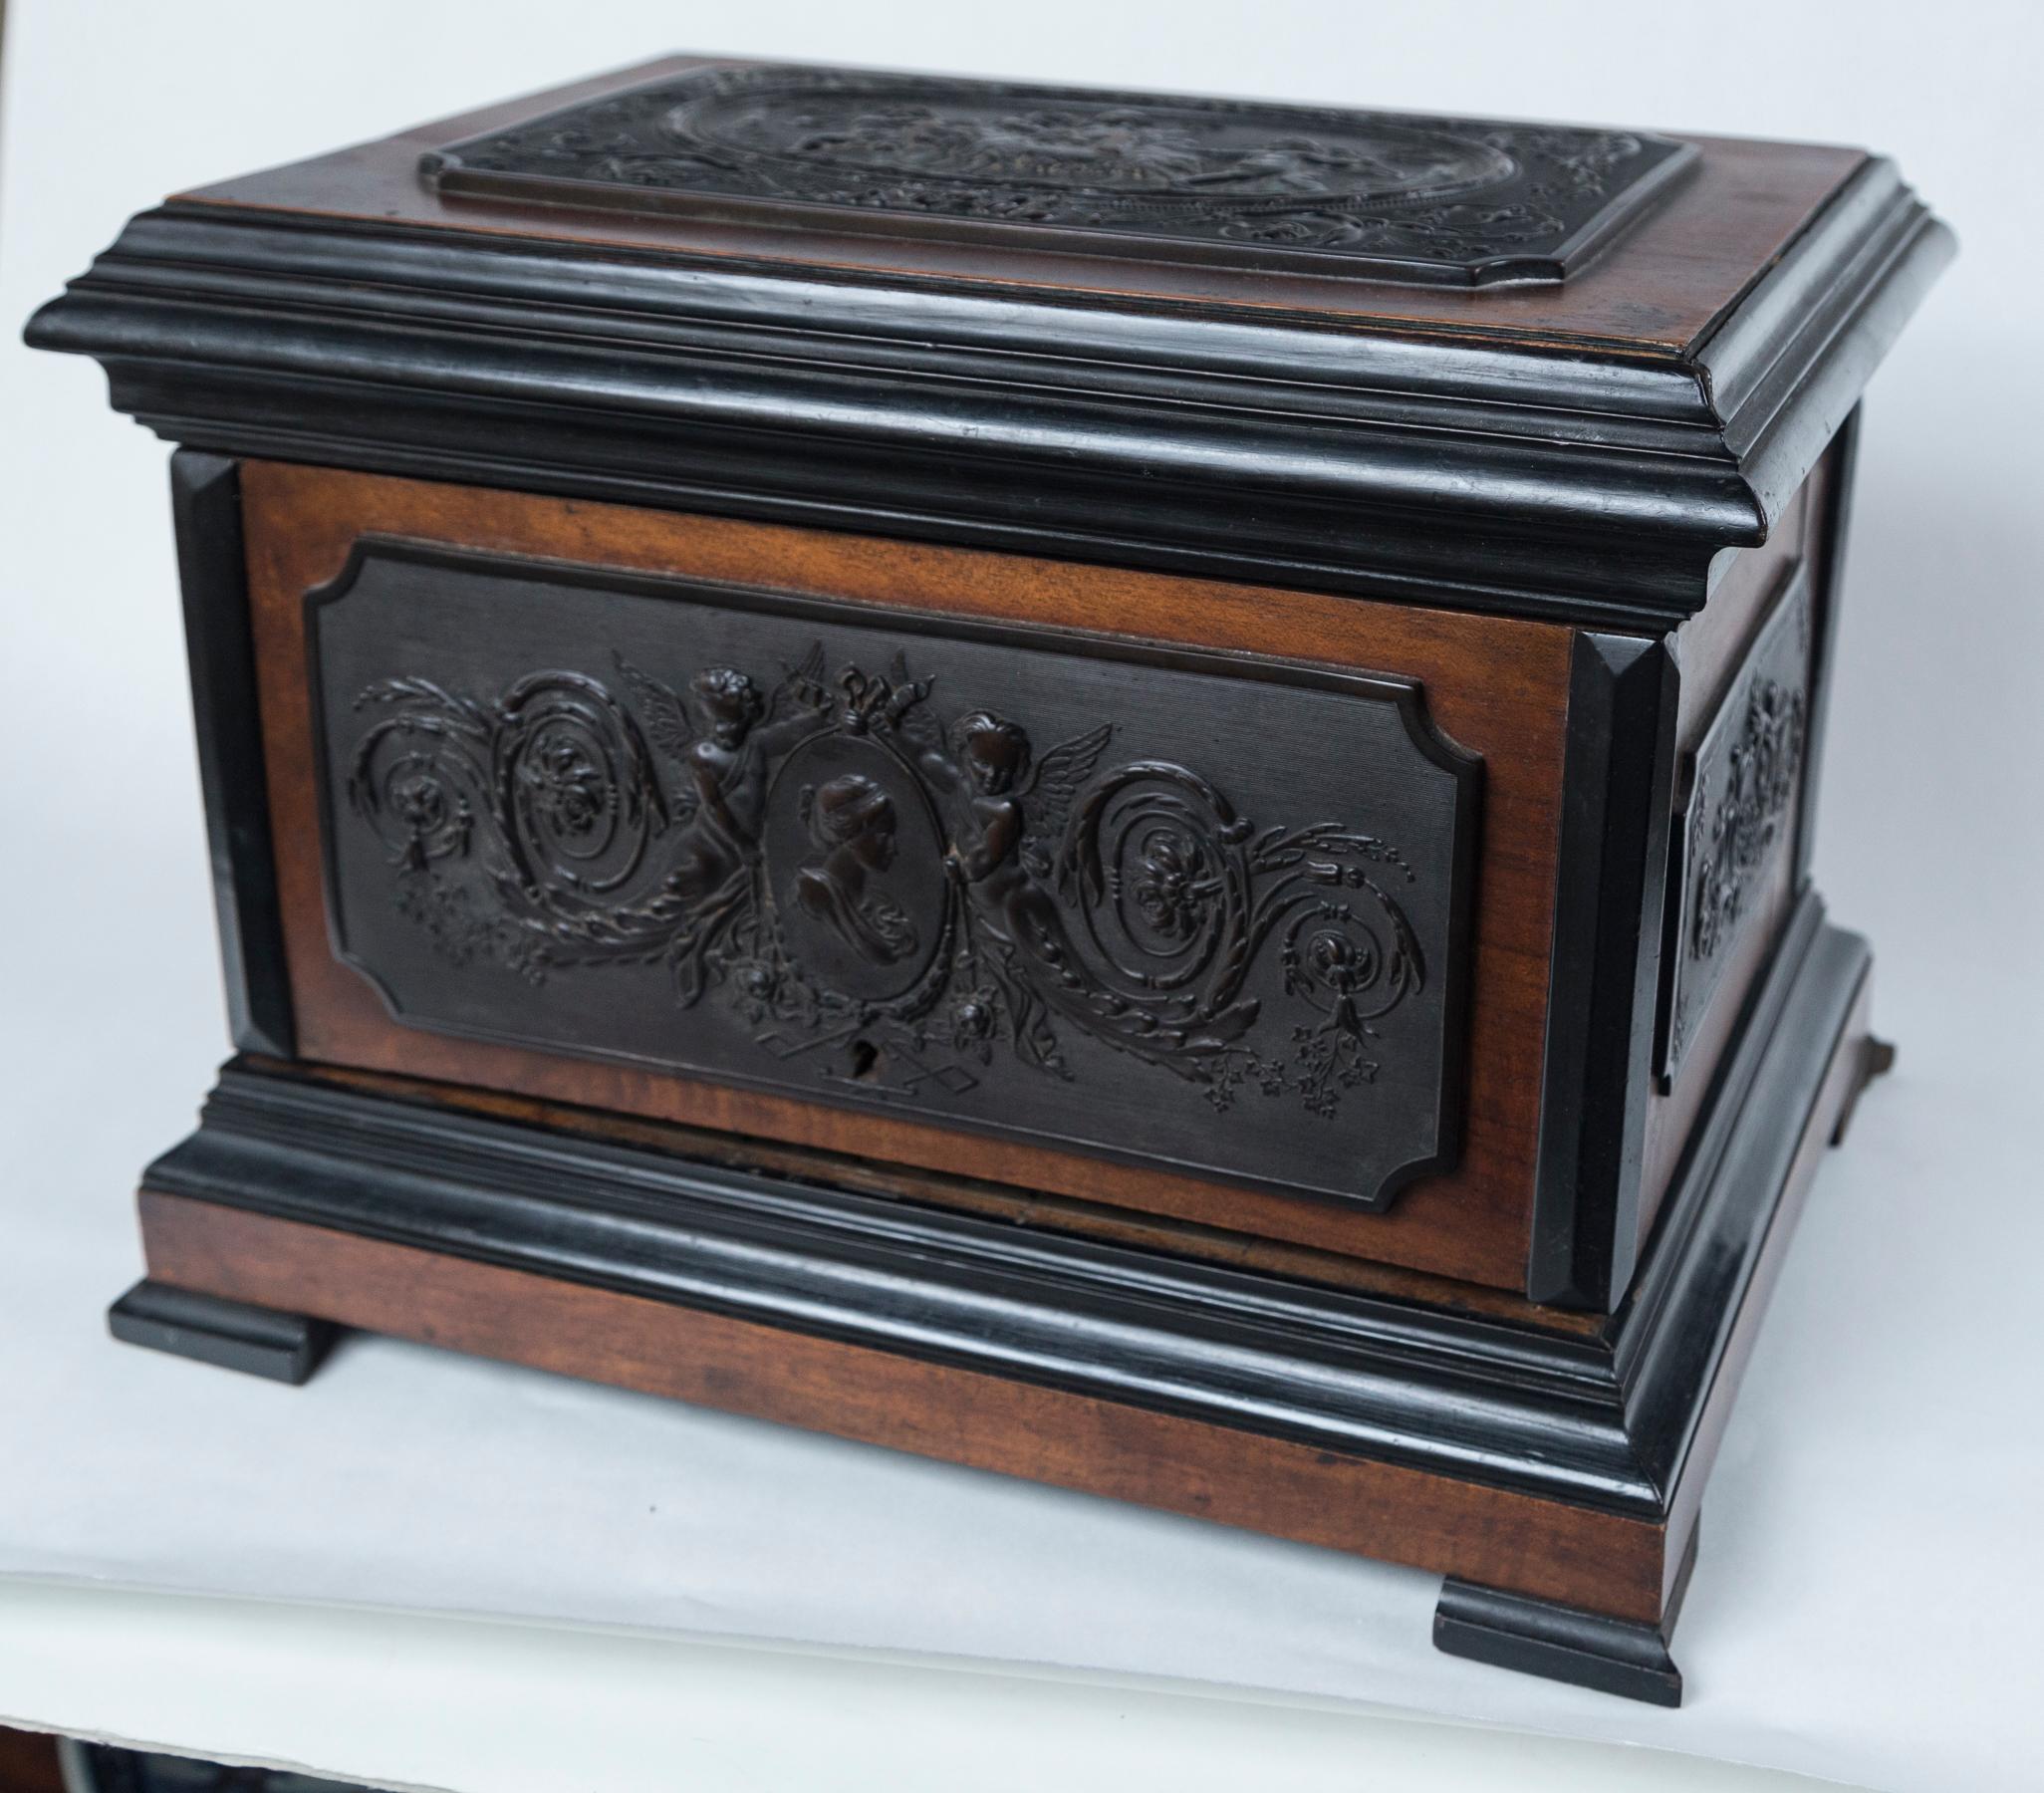 The box of a well grained polished mahogany or other hard wood with ebonized moldings and feet, applied dark bronze plaques of cavorting putti with a goat (top) a classical medallion of a female profile with putti on either side (front) and panels